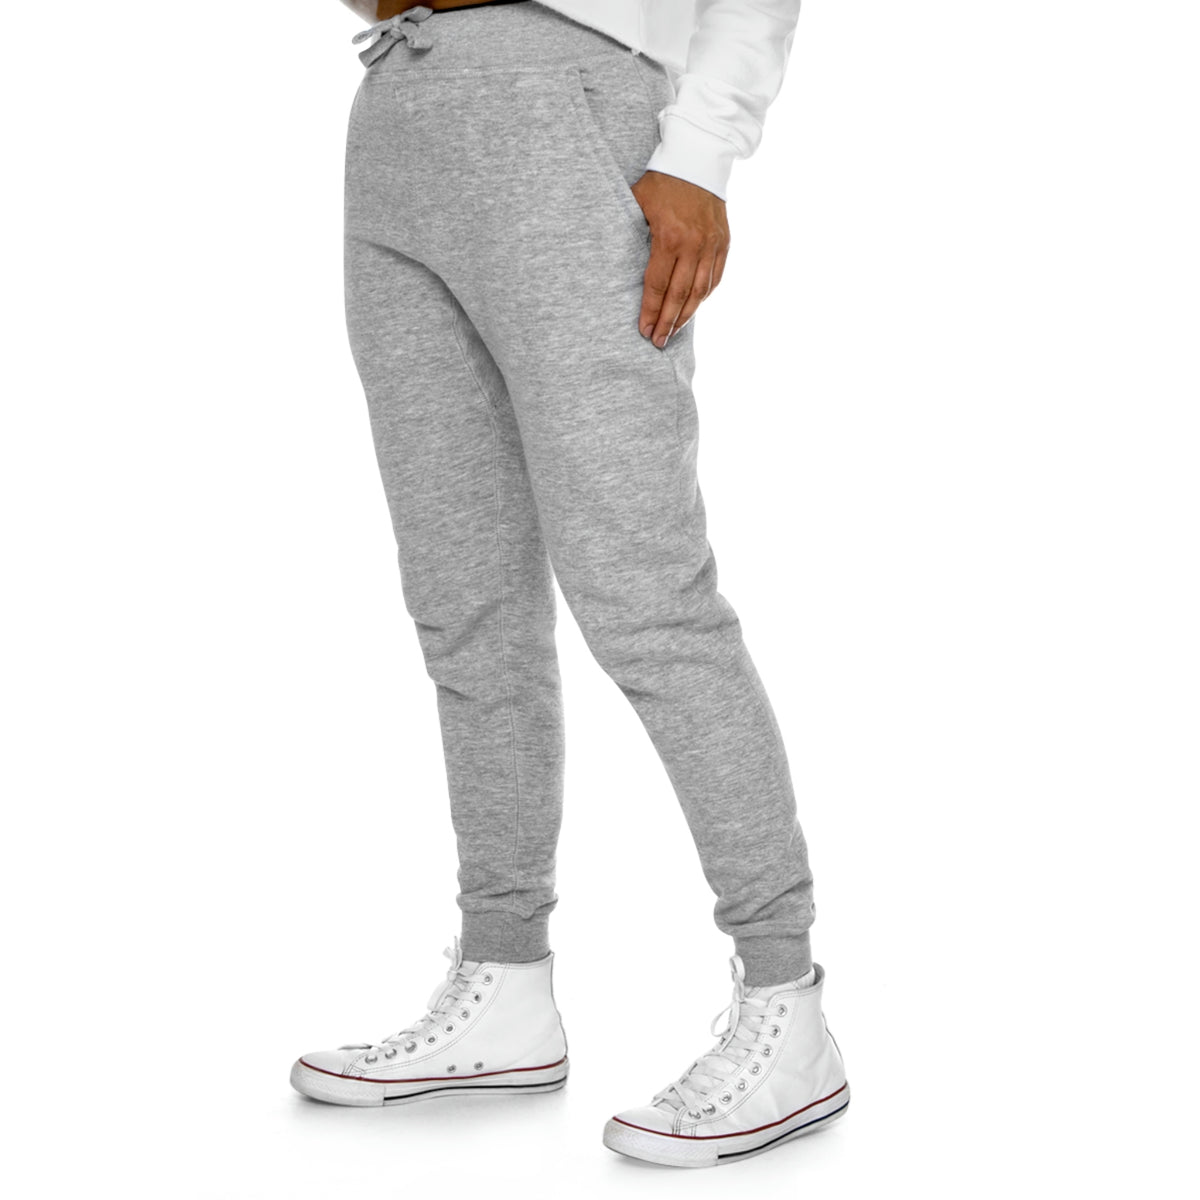 Buffalo Bills football joggers paired with white high tops and a white sweatshirt.